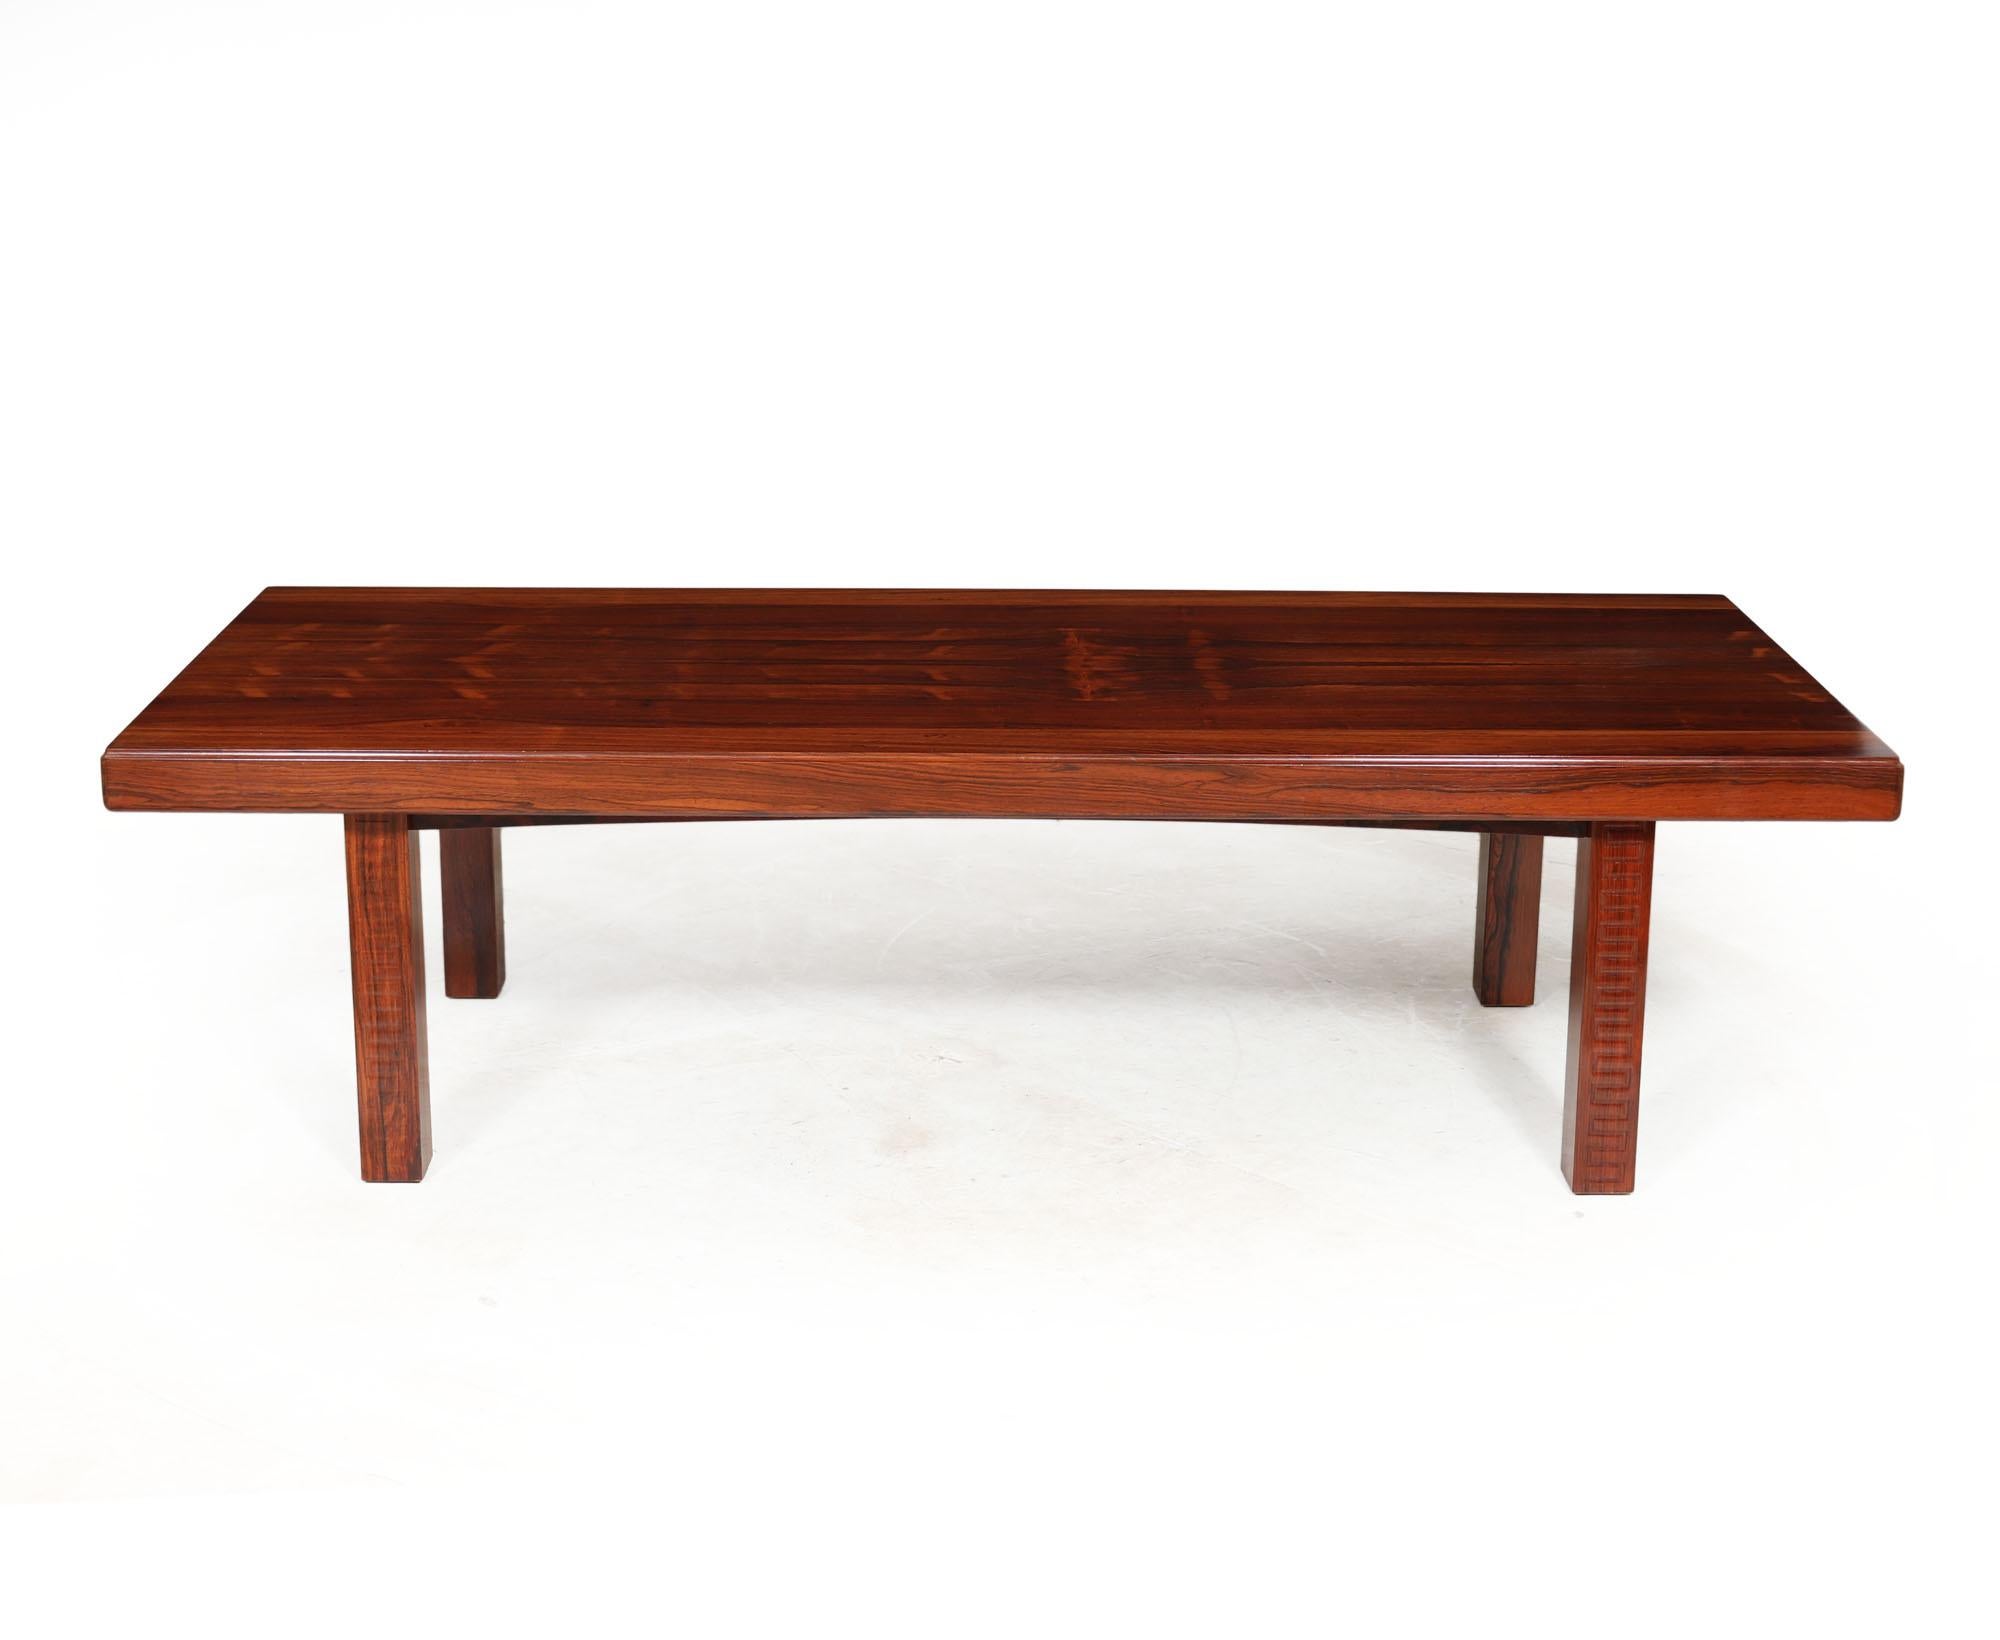 DANISH MID CENTURY COFFEE TABLE
This mid-century rosewood coffee table showcases a classic Danish design that transcends trends, making it a timeless addition to any living room decor. Its sleek lines and warm rosewood finish exude elegance and